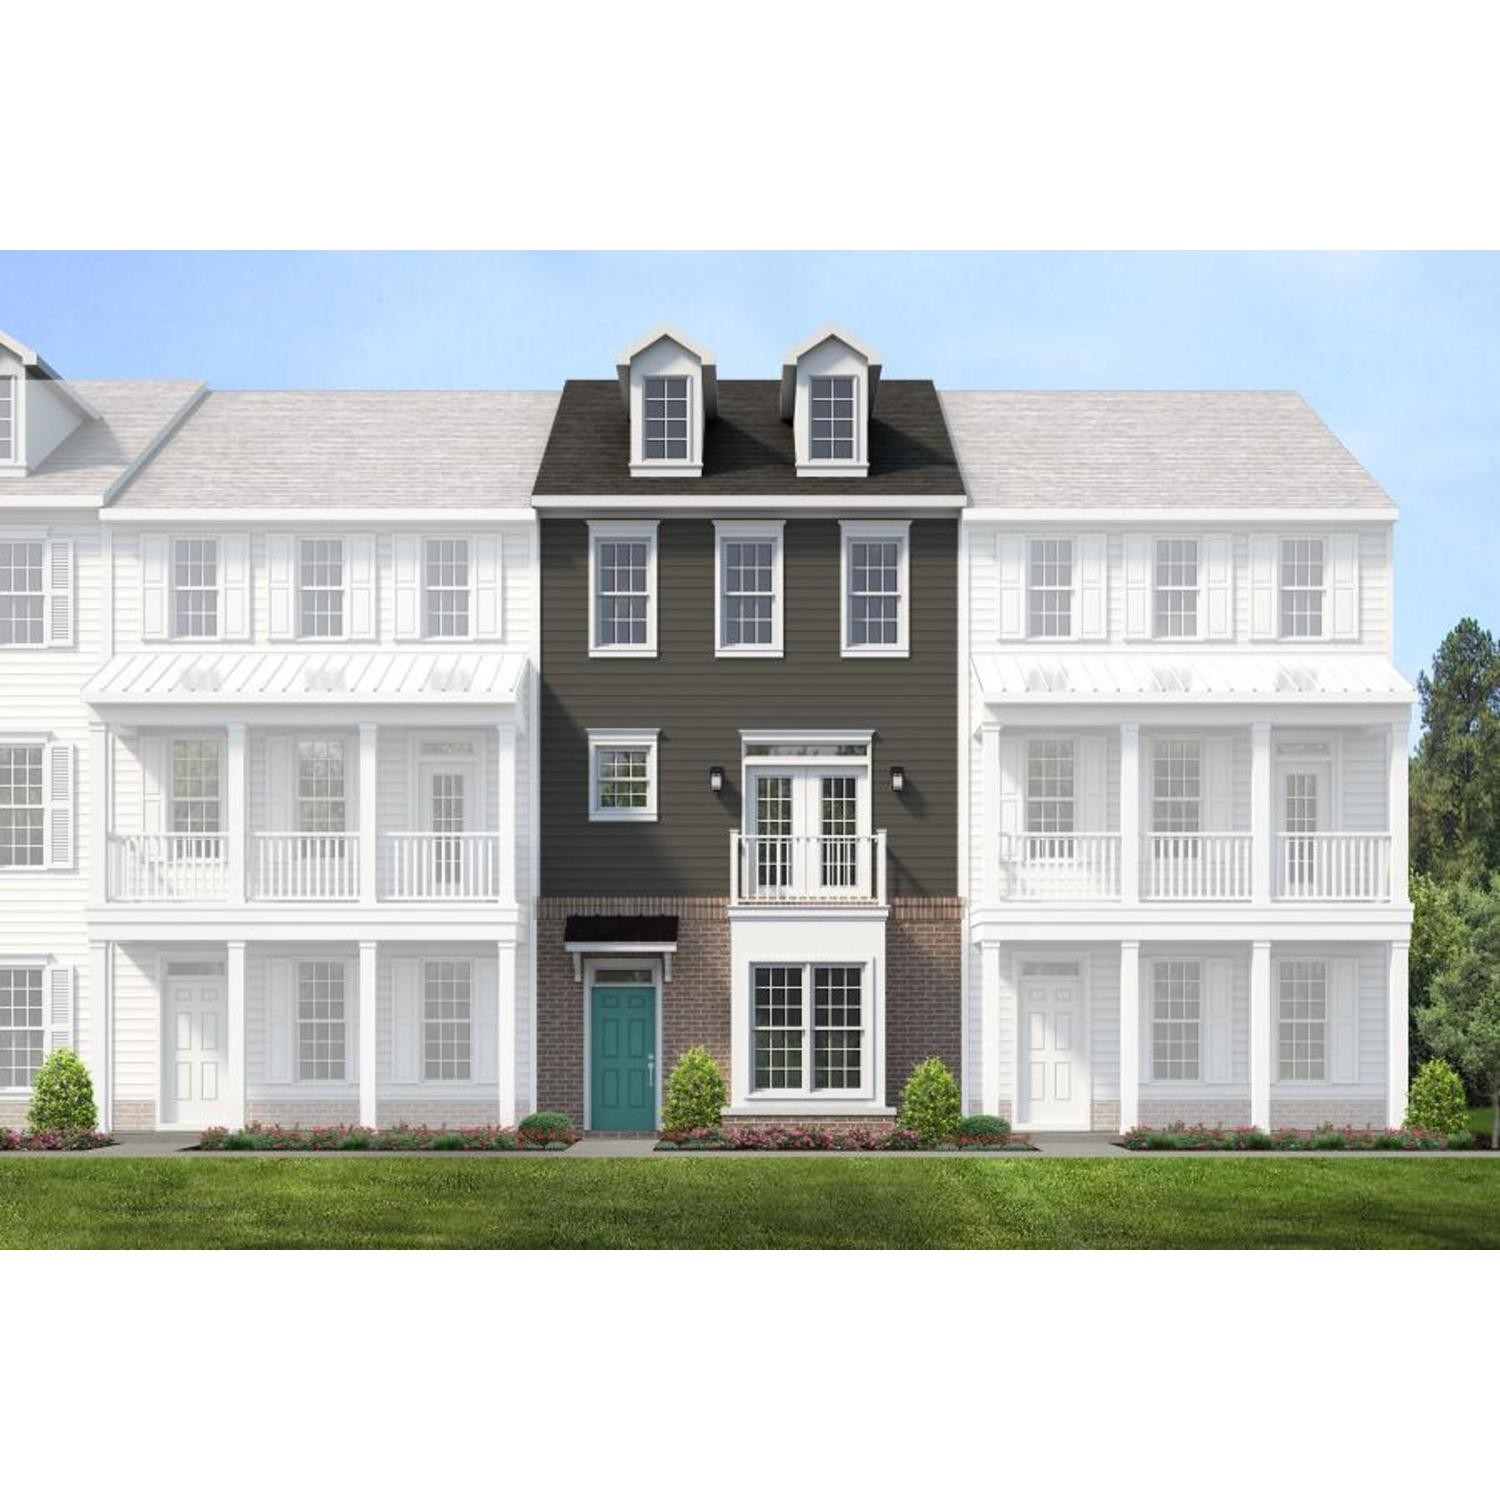 25. Cosby Village 3-Story Townhomes